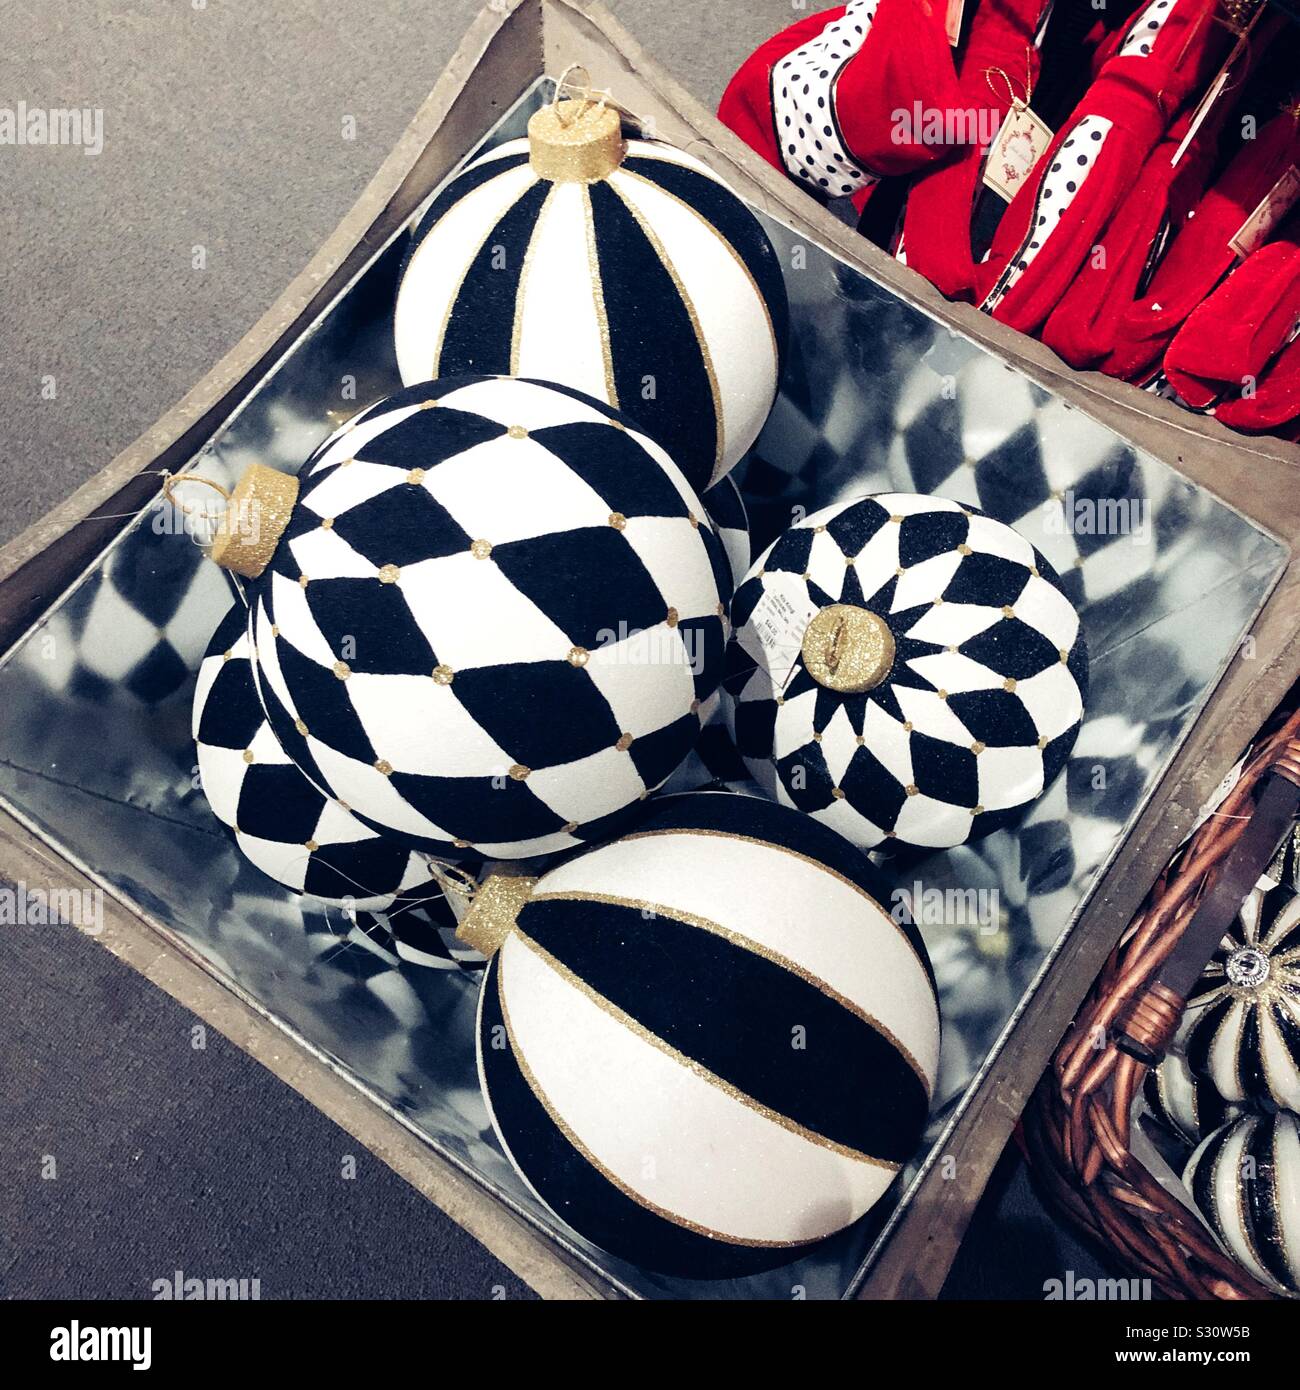 classy black and white harlequin themed christmas ornaments in a mirrored box Stock Photo